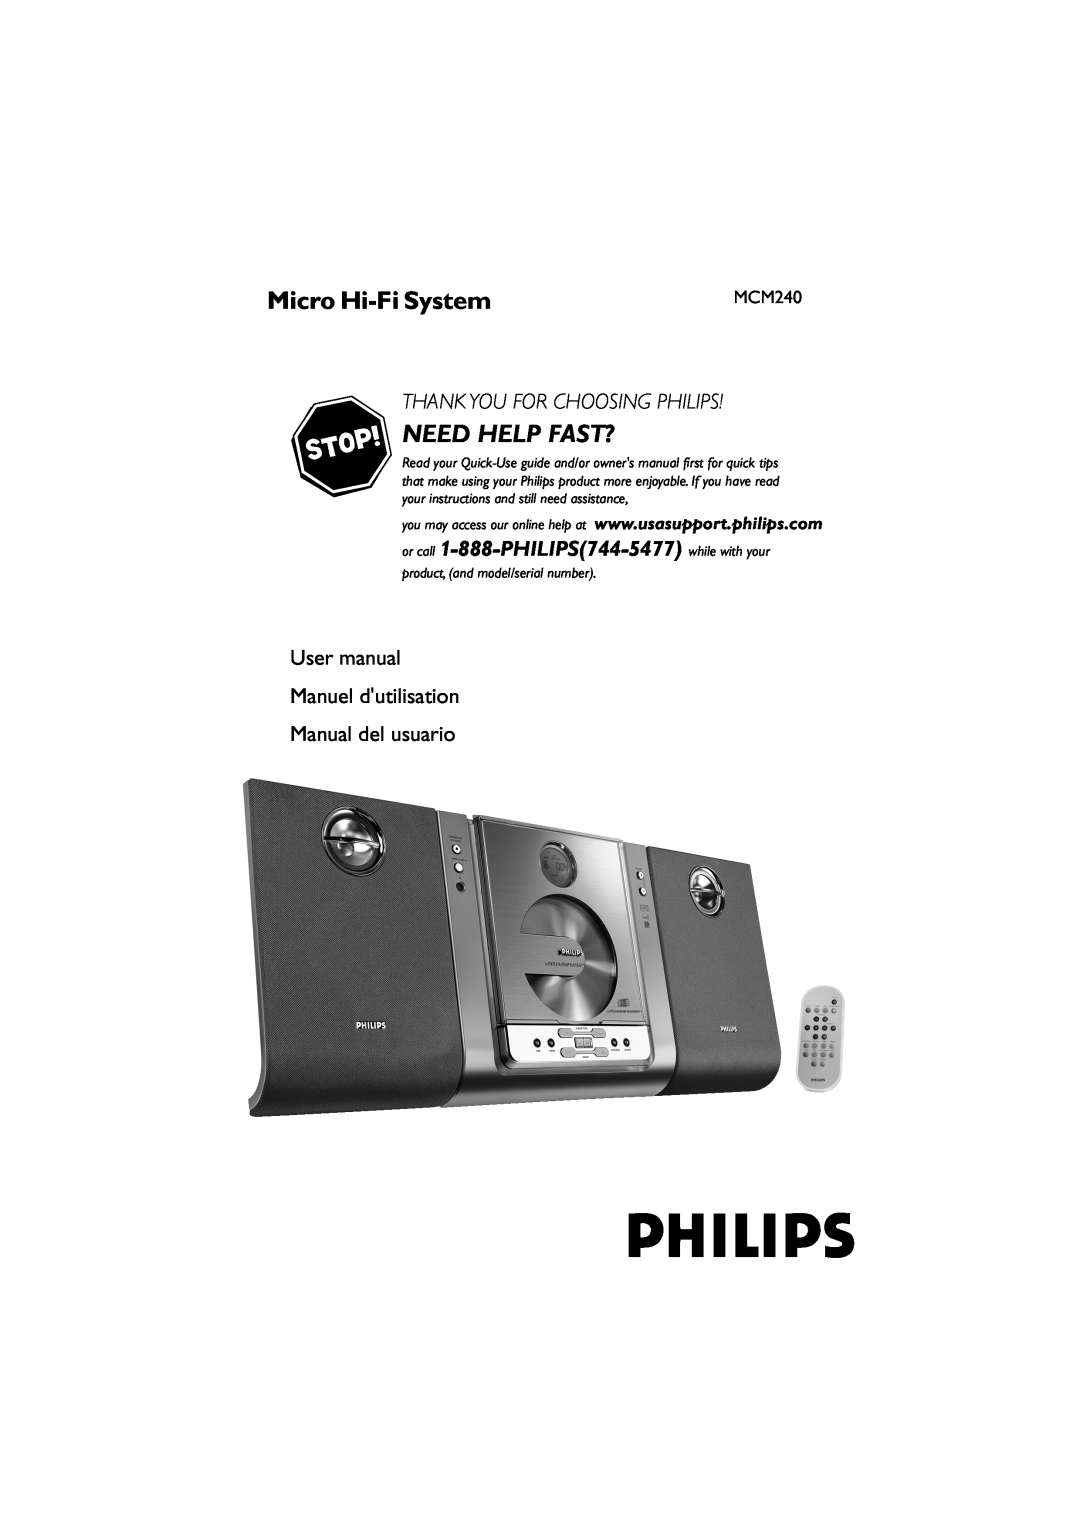 Philips MCM240 owner manual Micro Hi-FiSystem, Need Help Fast?, or call 1-888-PHILIPS744-5477 while with your 